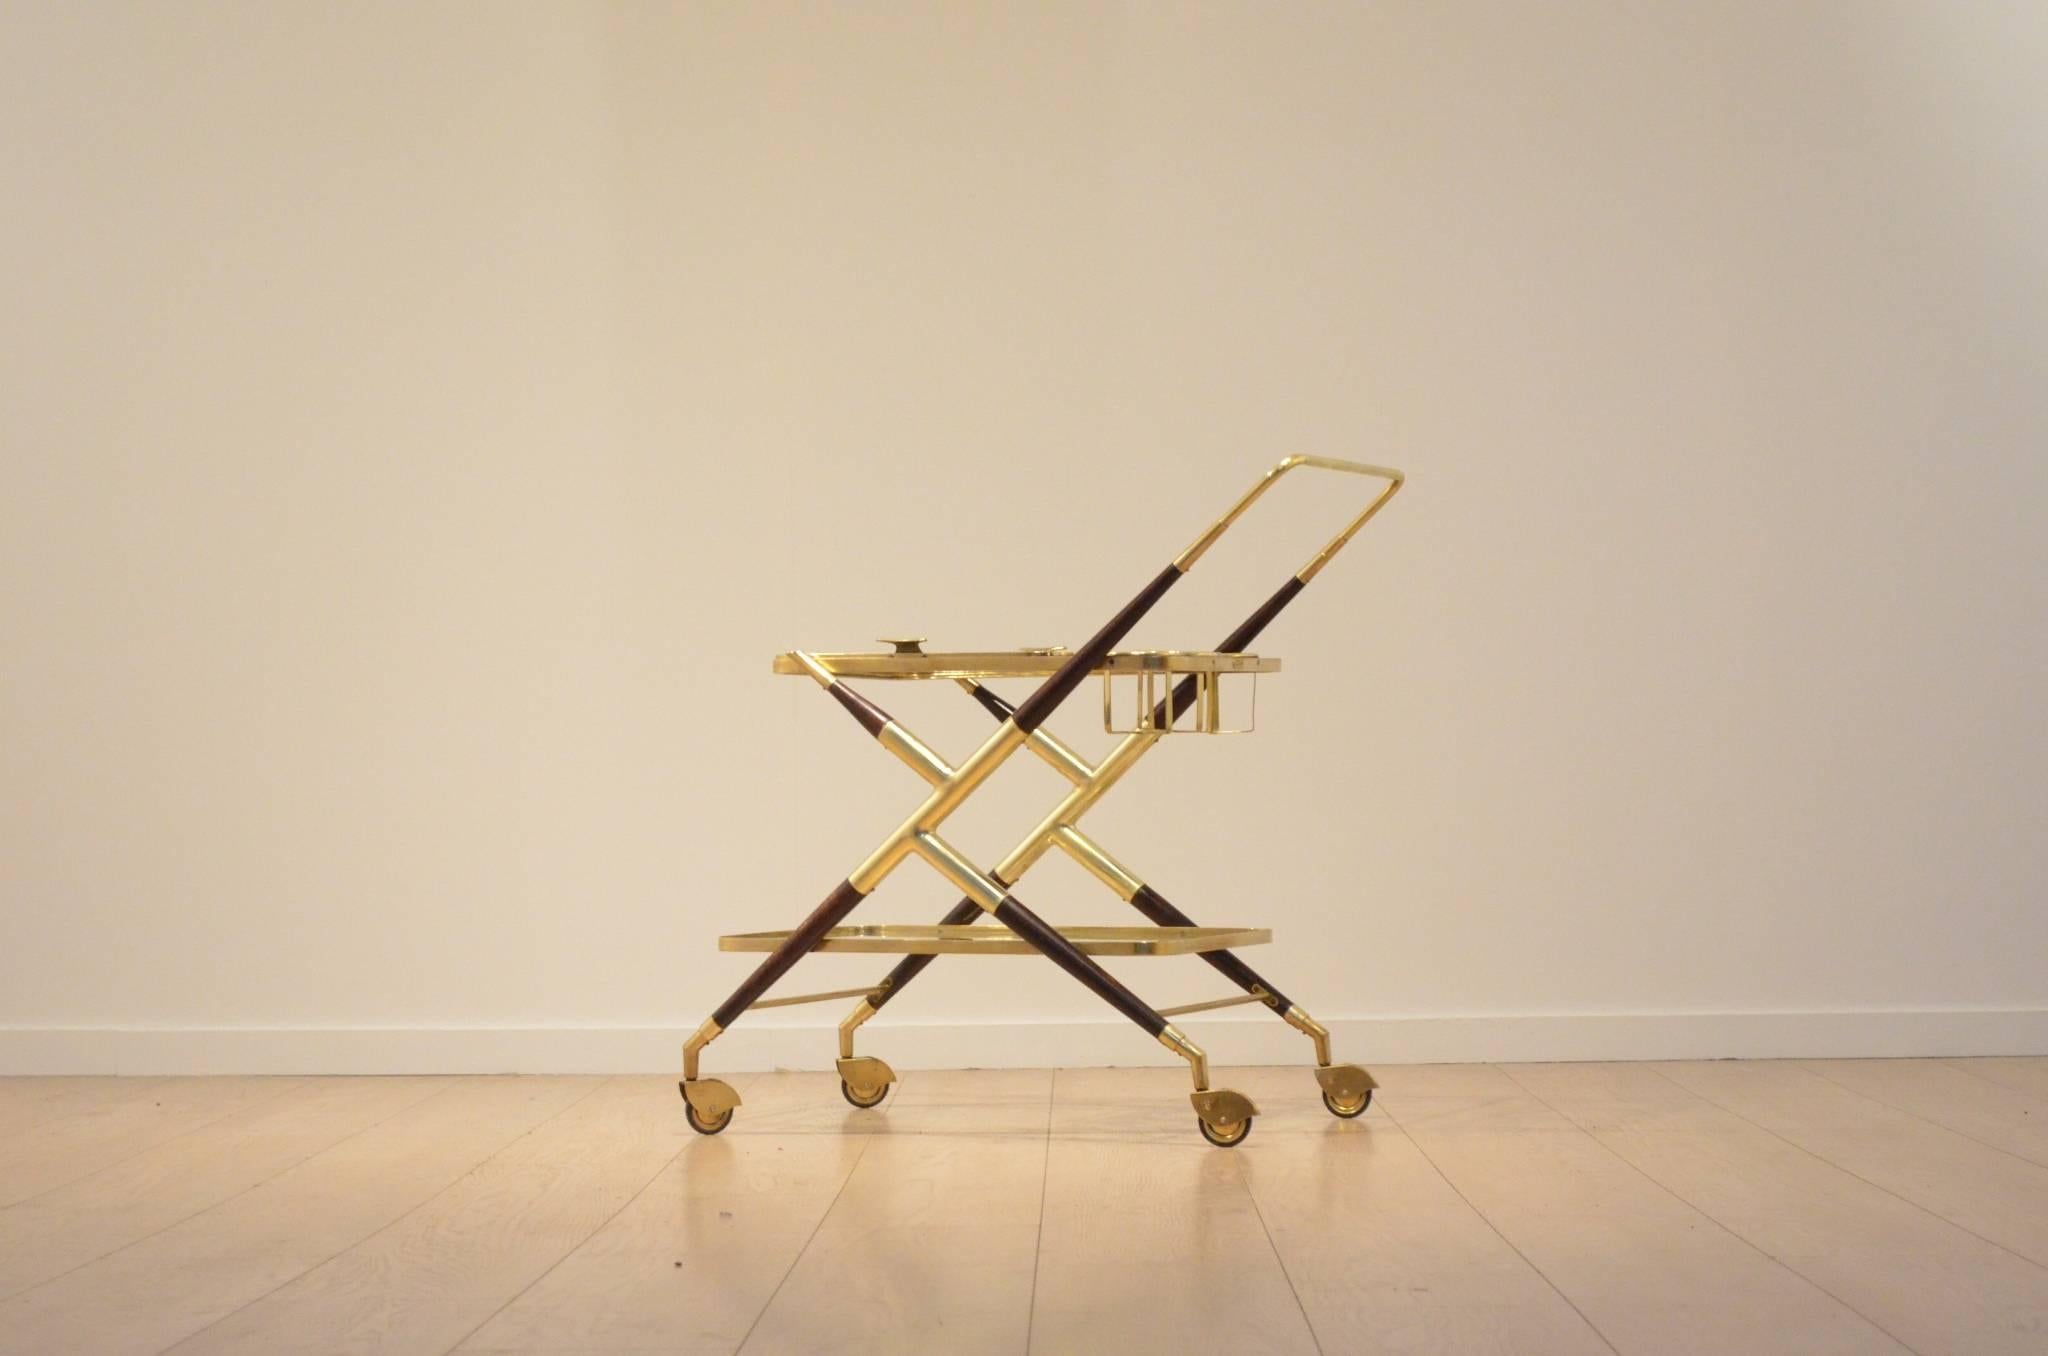 Italian 1950s Cesare Lacca serving trolley / bar with a zig zag shaped profile made in mahogany and brass, with three bottle holders placed near the handlebar of the trolley.

The first table surface made in glass and brass doubles up as a serving